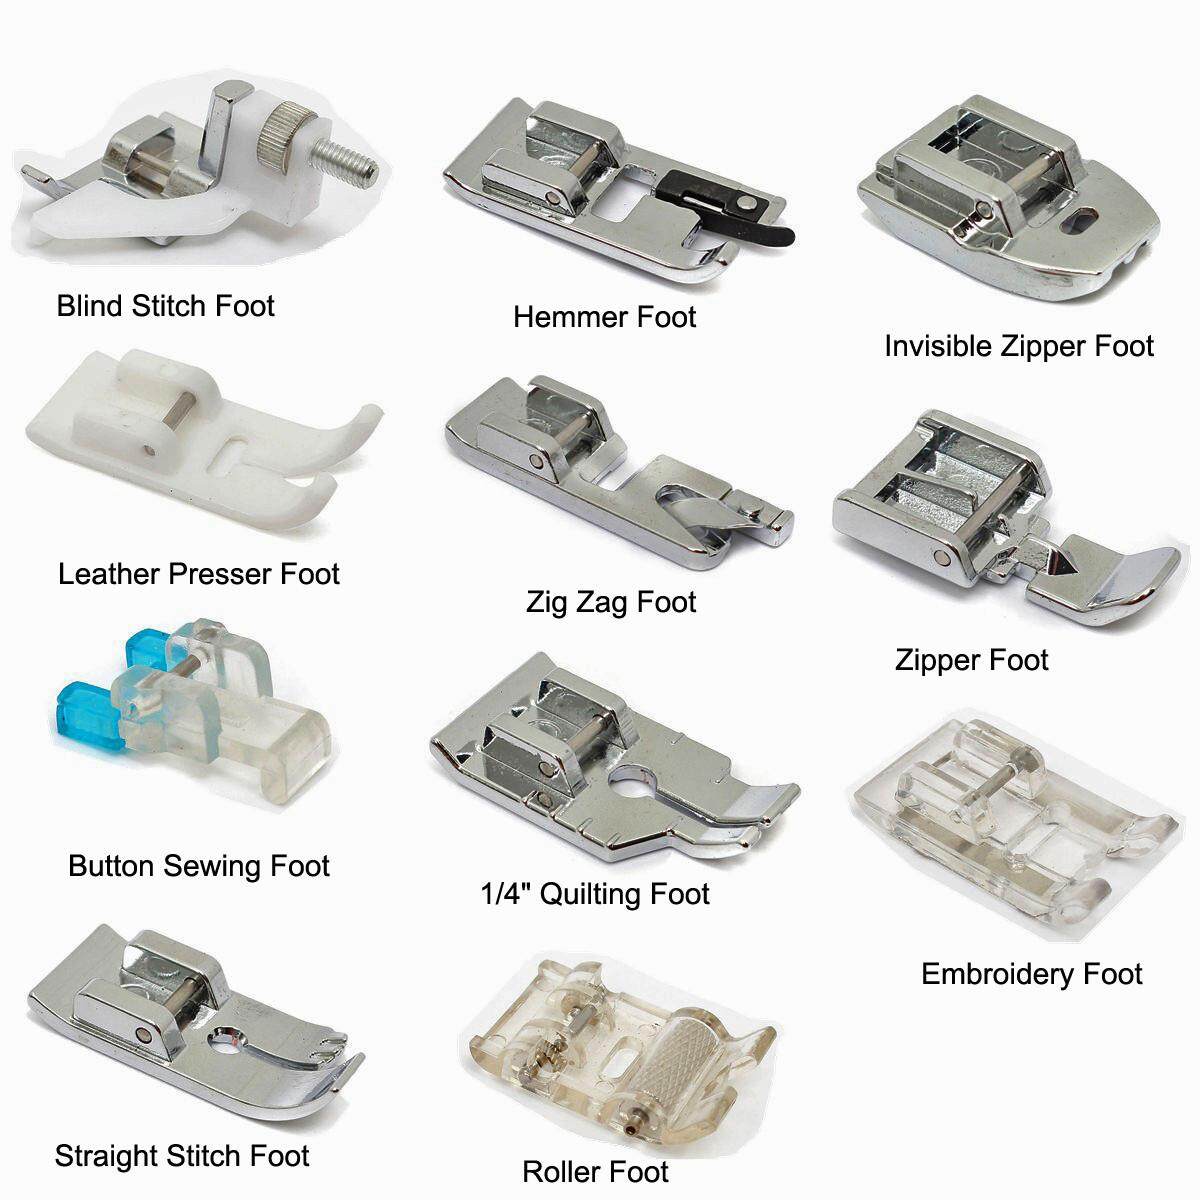 Plastic Foot Presser Parallel Stitch Sewing Machine Presser Foot Fits for Brother Domestic Sewing Machine 